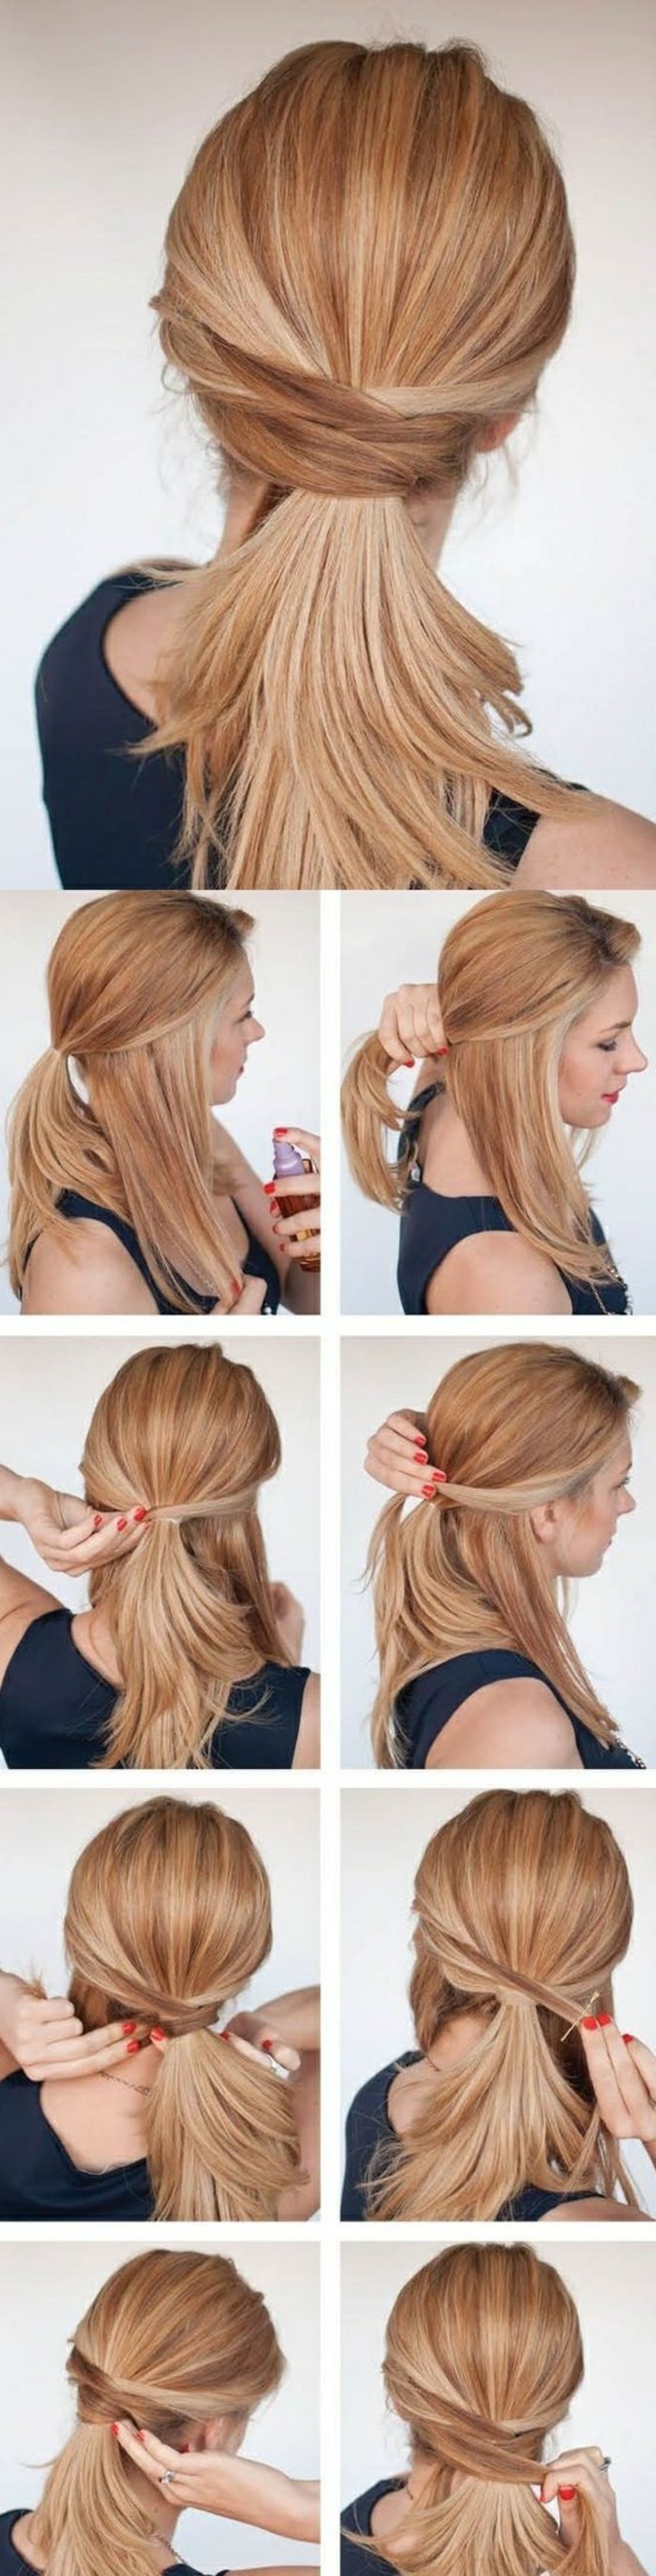 easy updos for long hair, blonde hair, in a low ponytail, held by strands of hair, step by step, diy tutorial, 